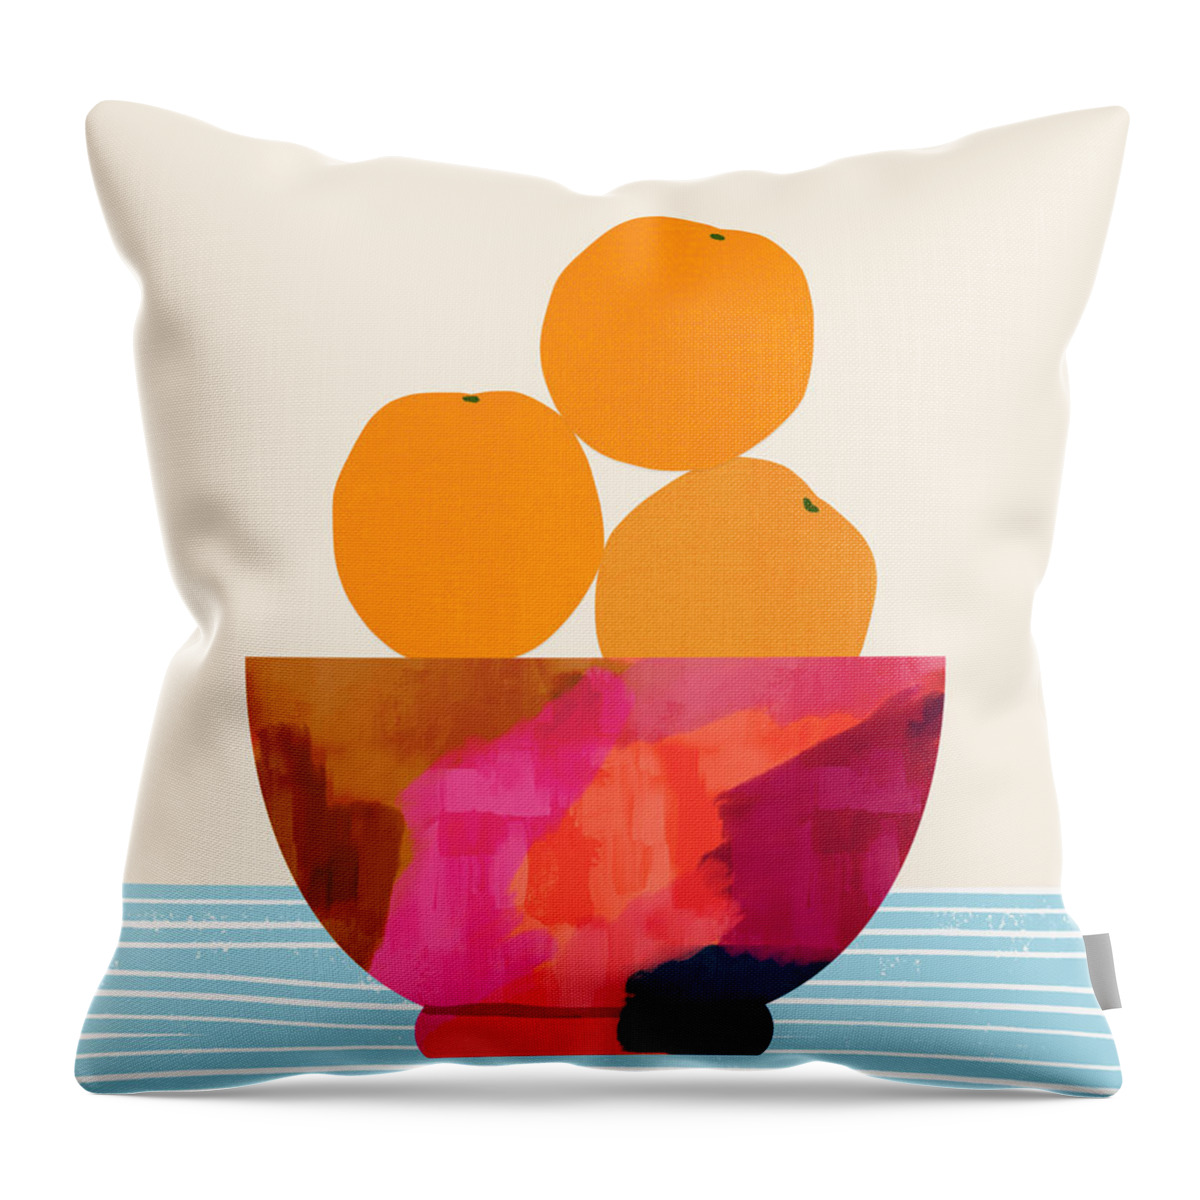 Oranges Throw Pillow featuring the digital art Oranges In A Painted Bowl- Art by Linda Woods by Linda Woods